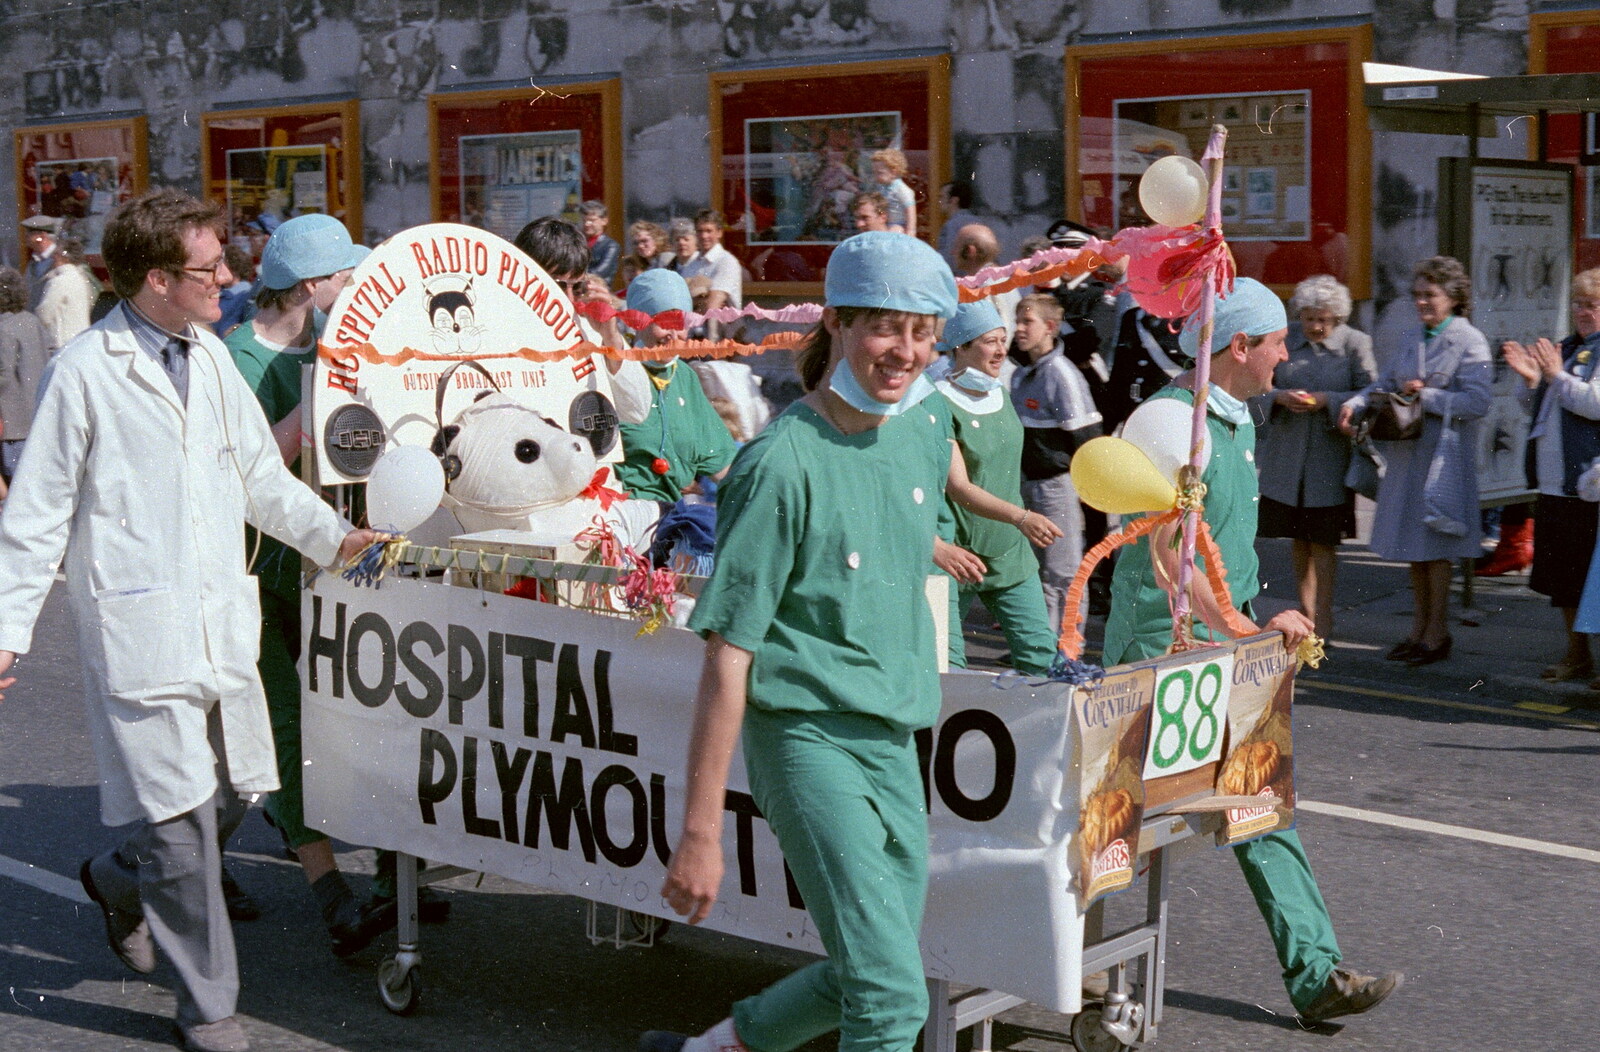 The Hospital Radio Plymouth float from Uni: The Lord Mayor's Procession, Plymouth, Devon - 21st May 1986